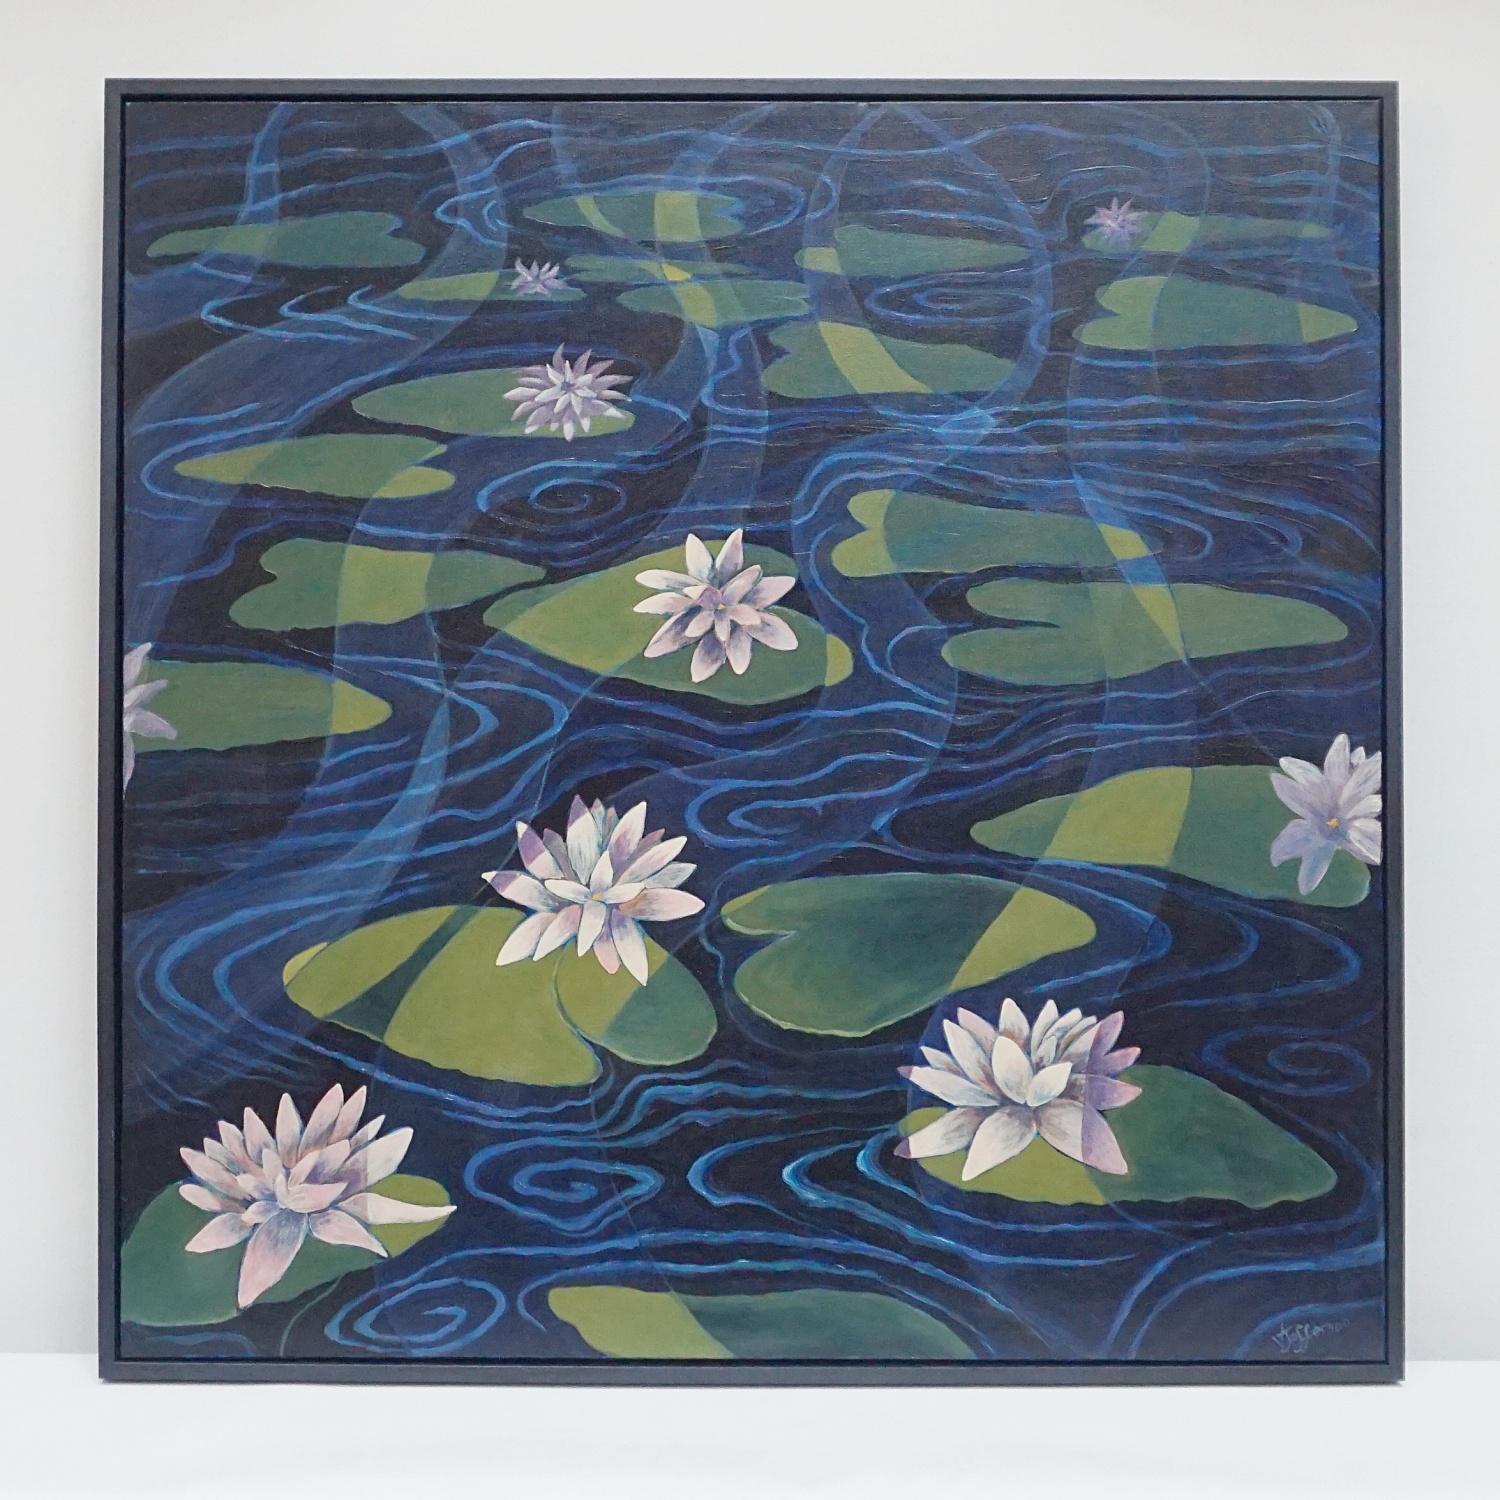 'Lily Pads' An Art Deco style contemporary painting by Vera Jefferson. Oil on canvas, depicting various lily pads dazzling in a deep blue pond. Painted amongst a stylised, abstract background. Signed V Jefferson to lower right. 


Vera Jefferson